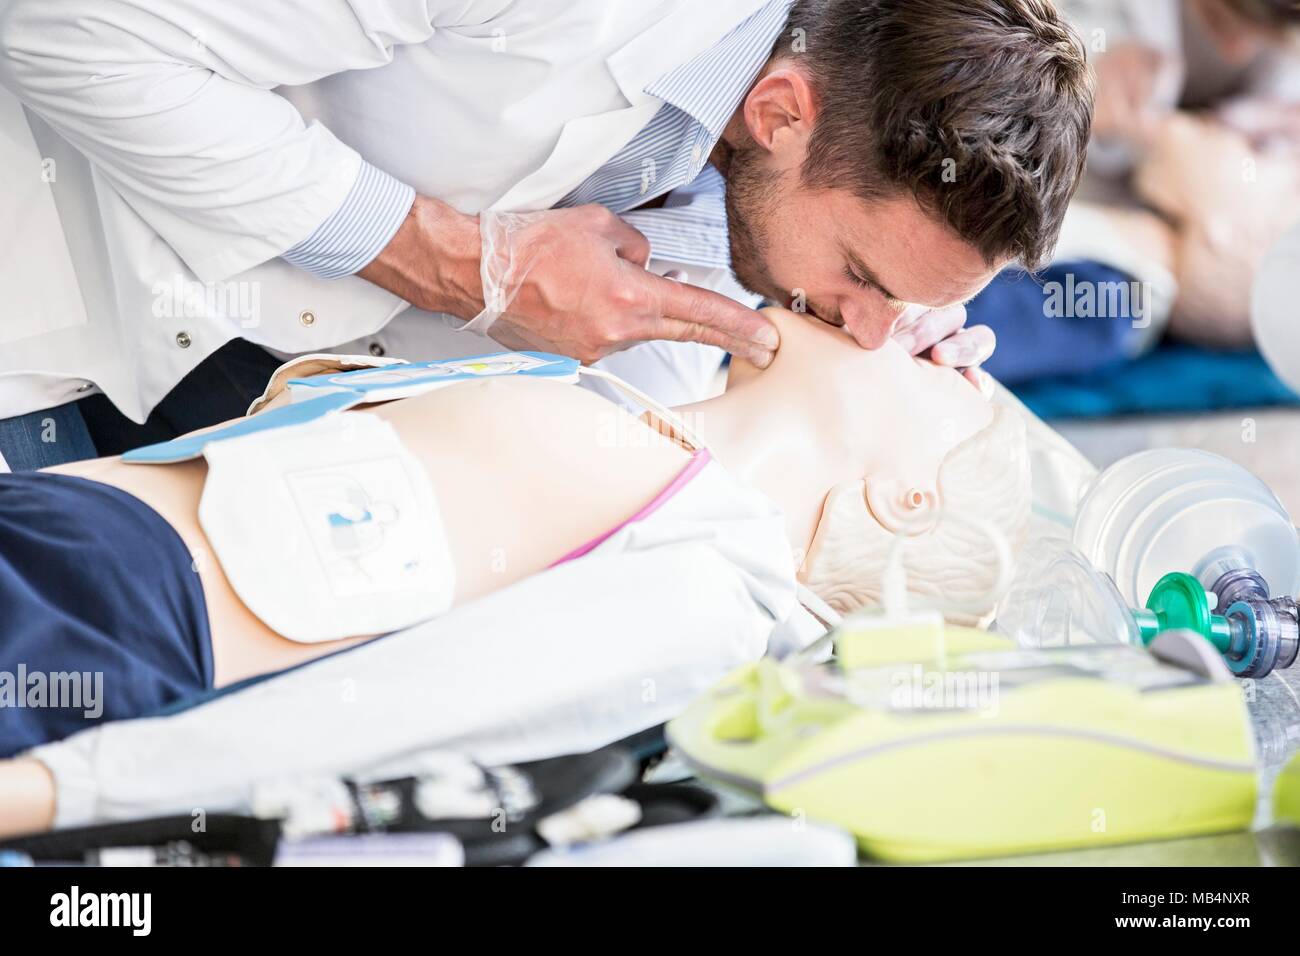 Doctor practising rescue breaths on a CPR training dummy. Stock Photo